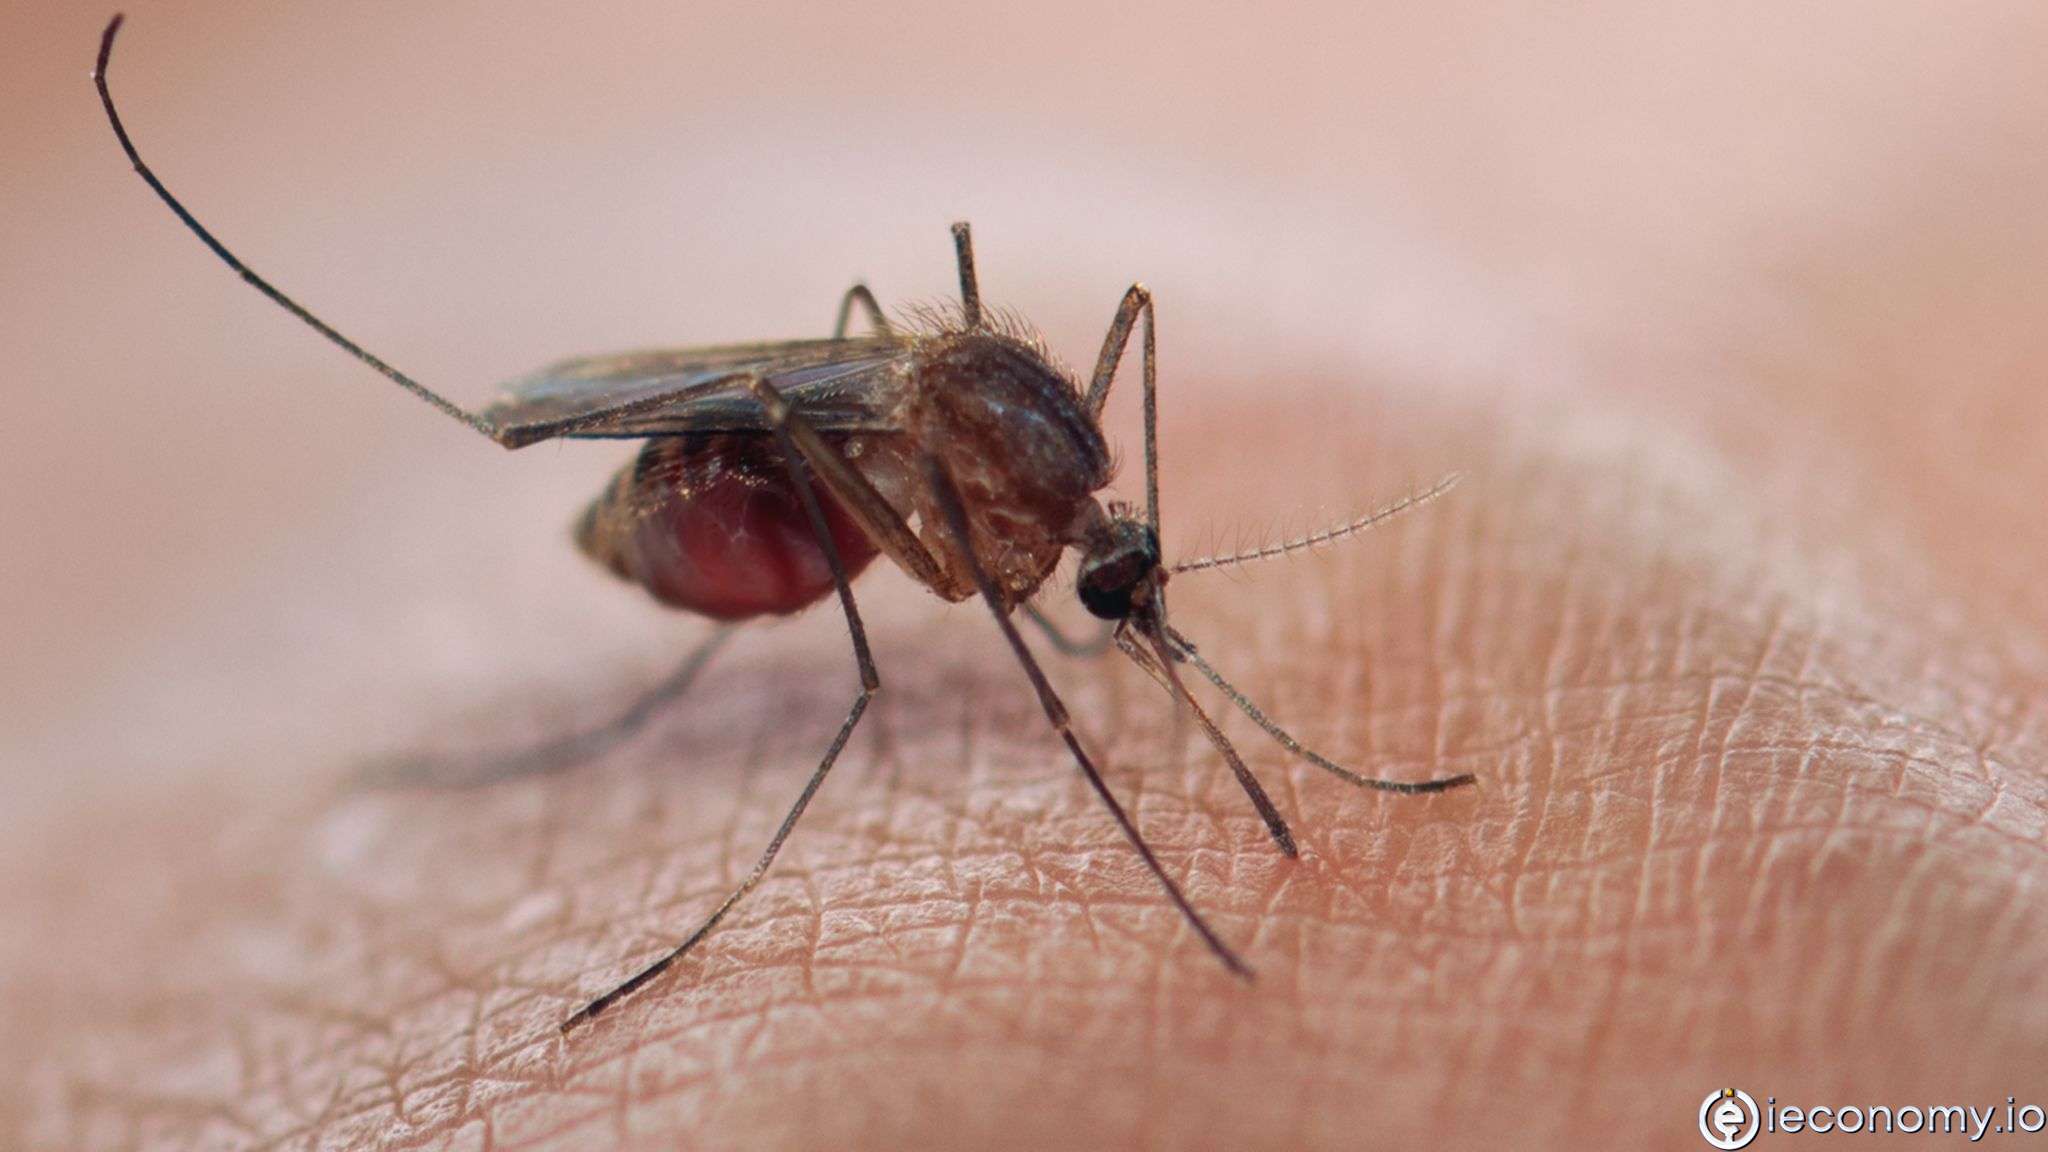 Biontech is aiming to develop a vaccine against malaria